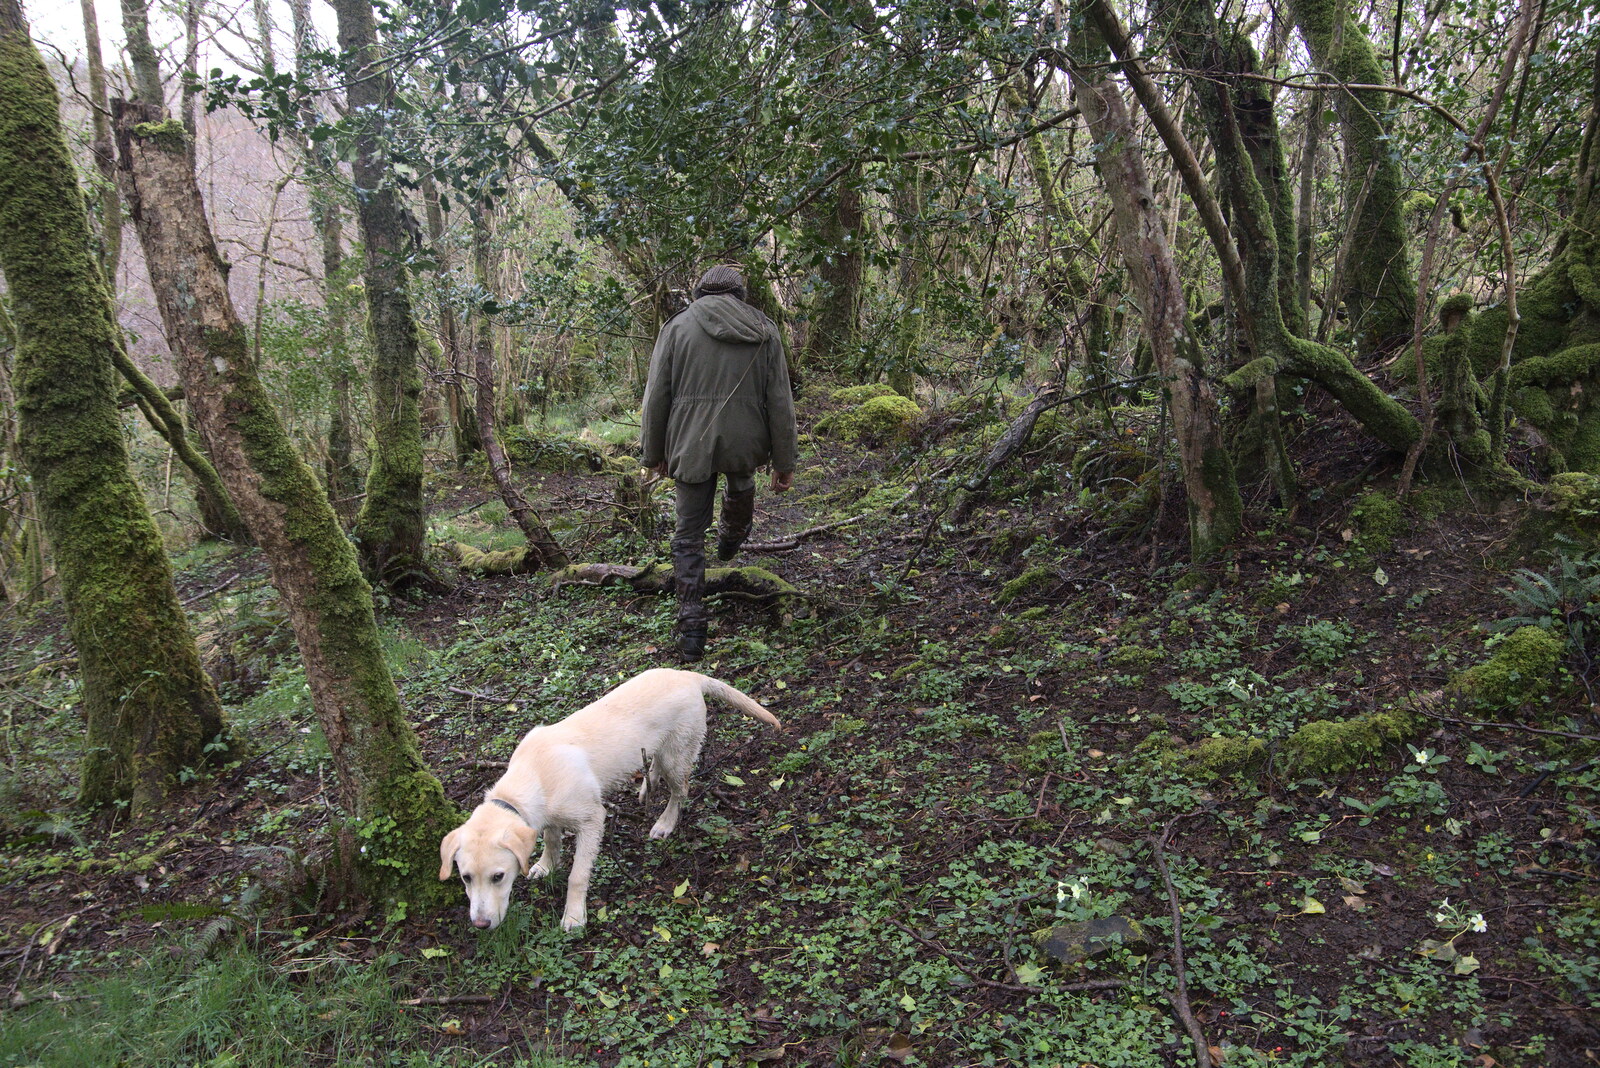 Milo and Philly out in the woods from Manorhamilton and Bundoran, Leitrim and Donegal, Ireland - 16th April 2022